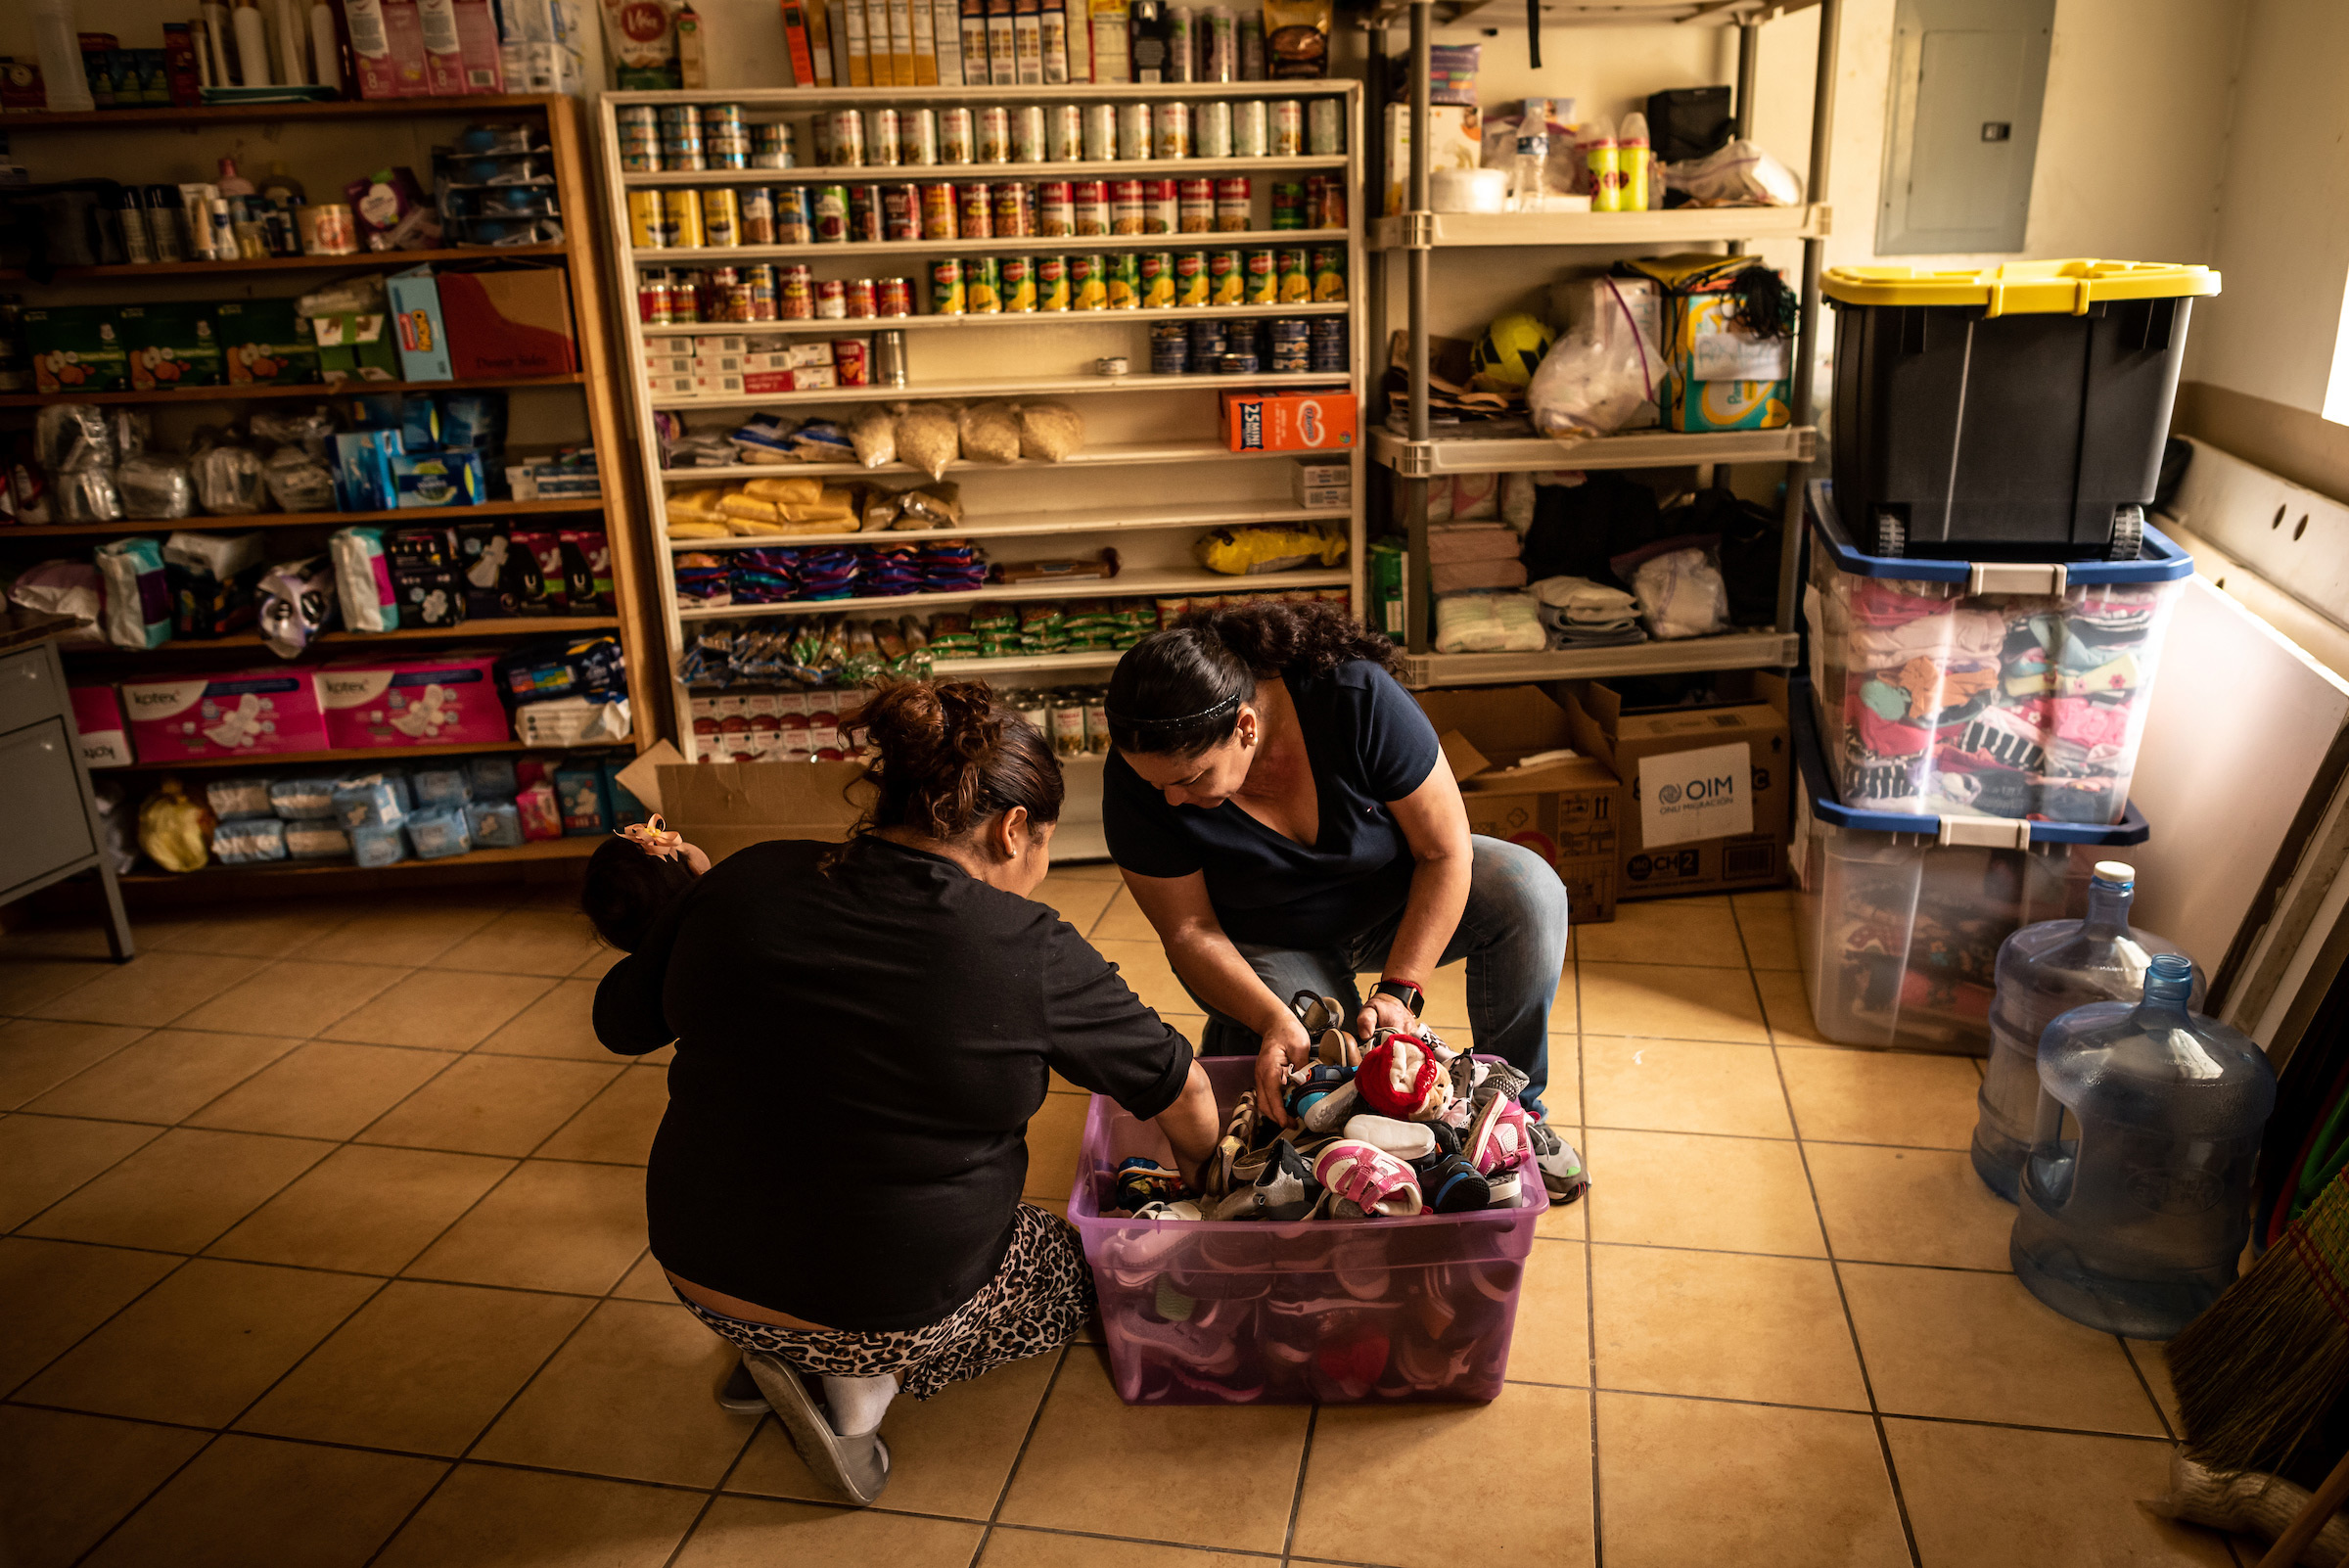 Shelter volunteer Marta Leticia Galarza Gandara, right, helps Isa find shoes for her baby daughter in a box of donations. Isa is an asylum seeker from Honduras, and has been waiting at the border under MPP since September 2019. (Meridith Kohut for TIME)